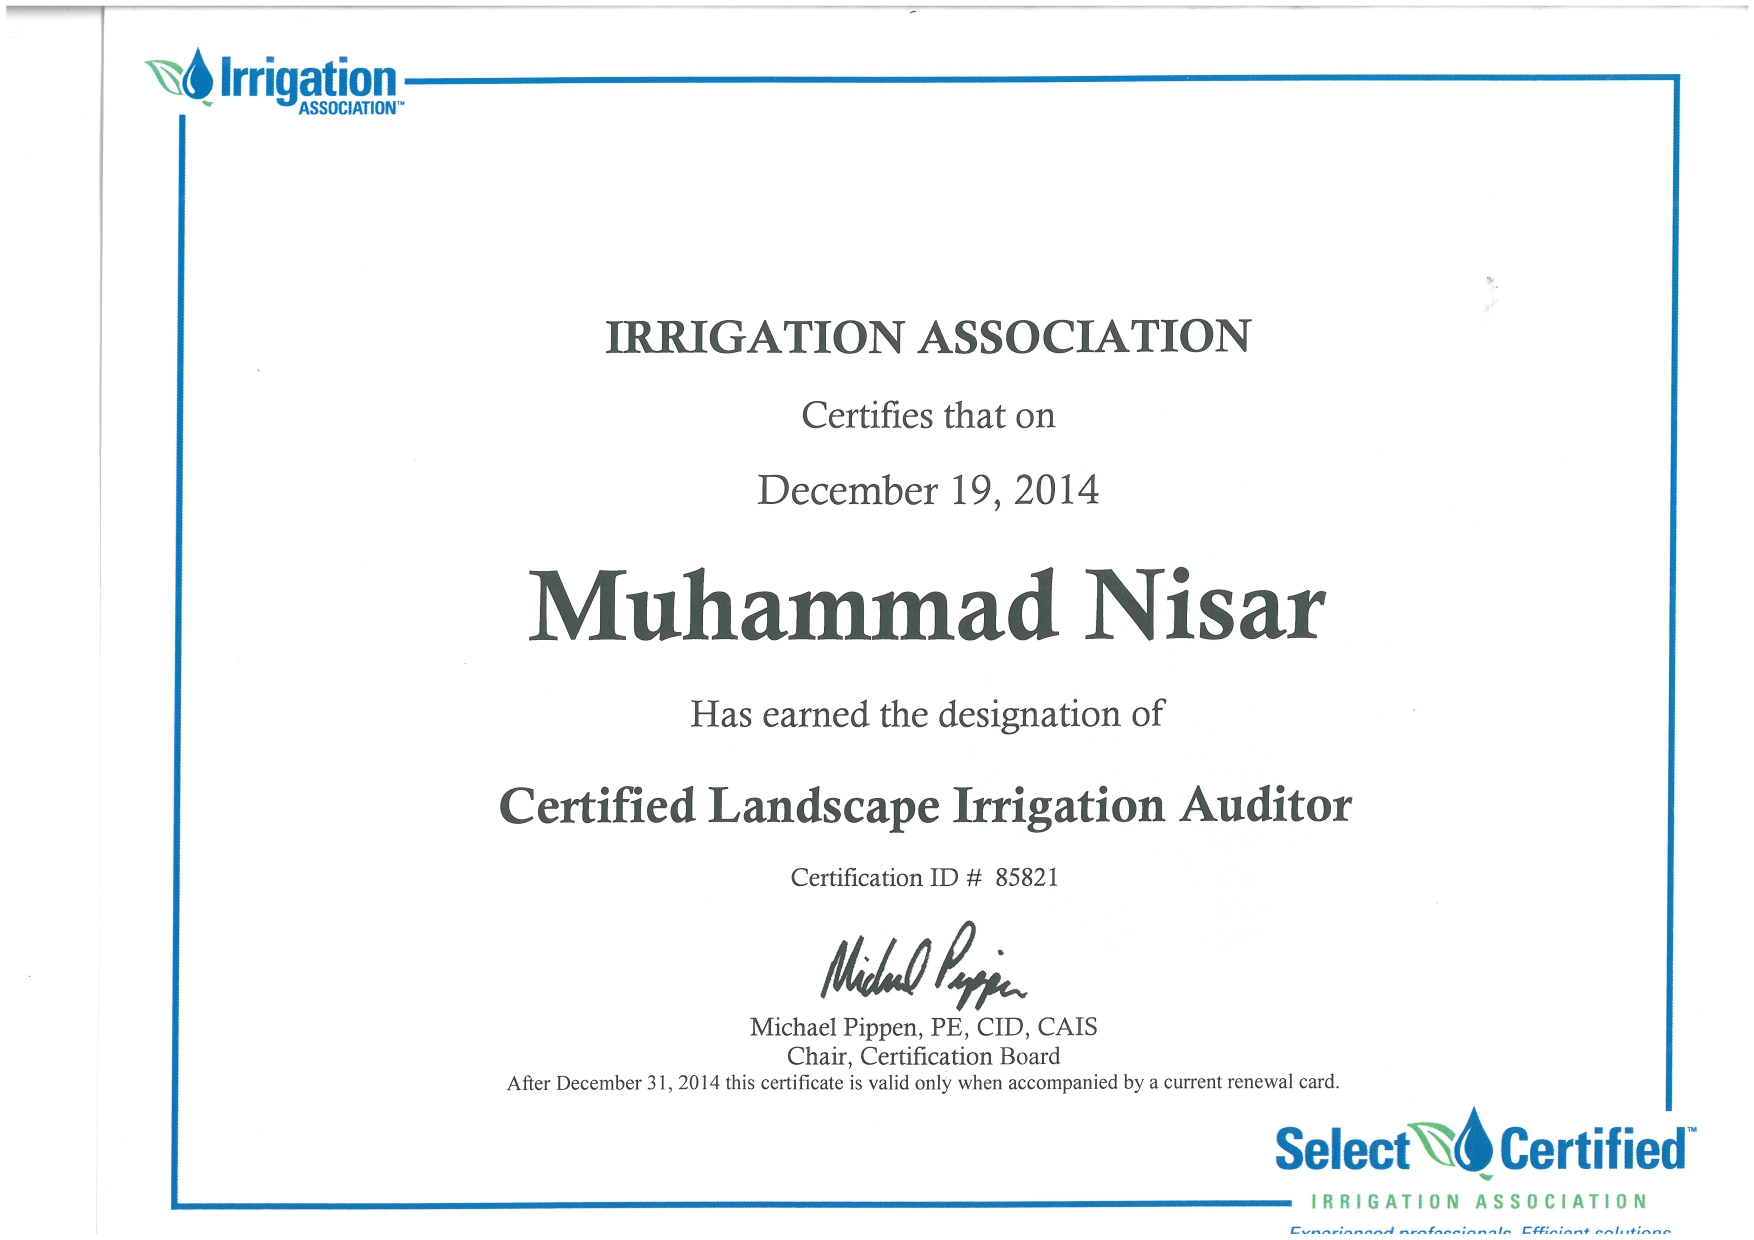 Wd Irrigation

 

IRRIGATION ASSOCIATION
Certifies that on

December 19, 2014

Muhammad Nisar

Has earned the designation of

Certified Landscape Irrigation Auditor
Certification ID # 85821
Hid By.
Michael Pippen, PE, CID, CAIS

Chair, Certification Board
After December 31, 2014 this certificate 1s valid only when accompanied by a current renewal card

Select \d Certified

IRRIGATION ASSOCIATION
—— Bn imems melsotinme